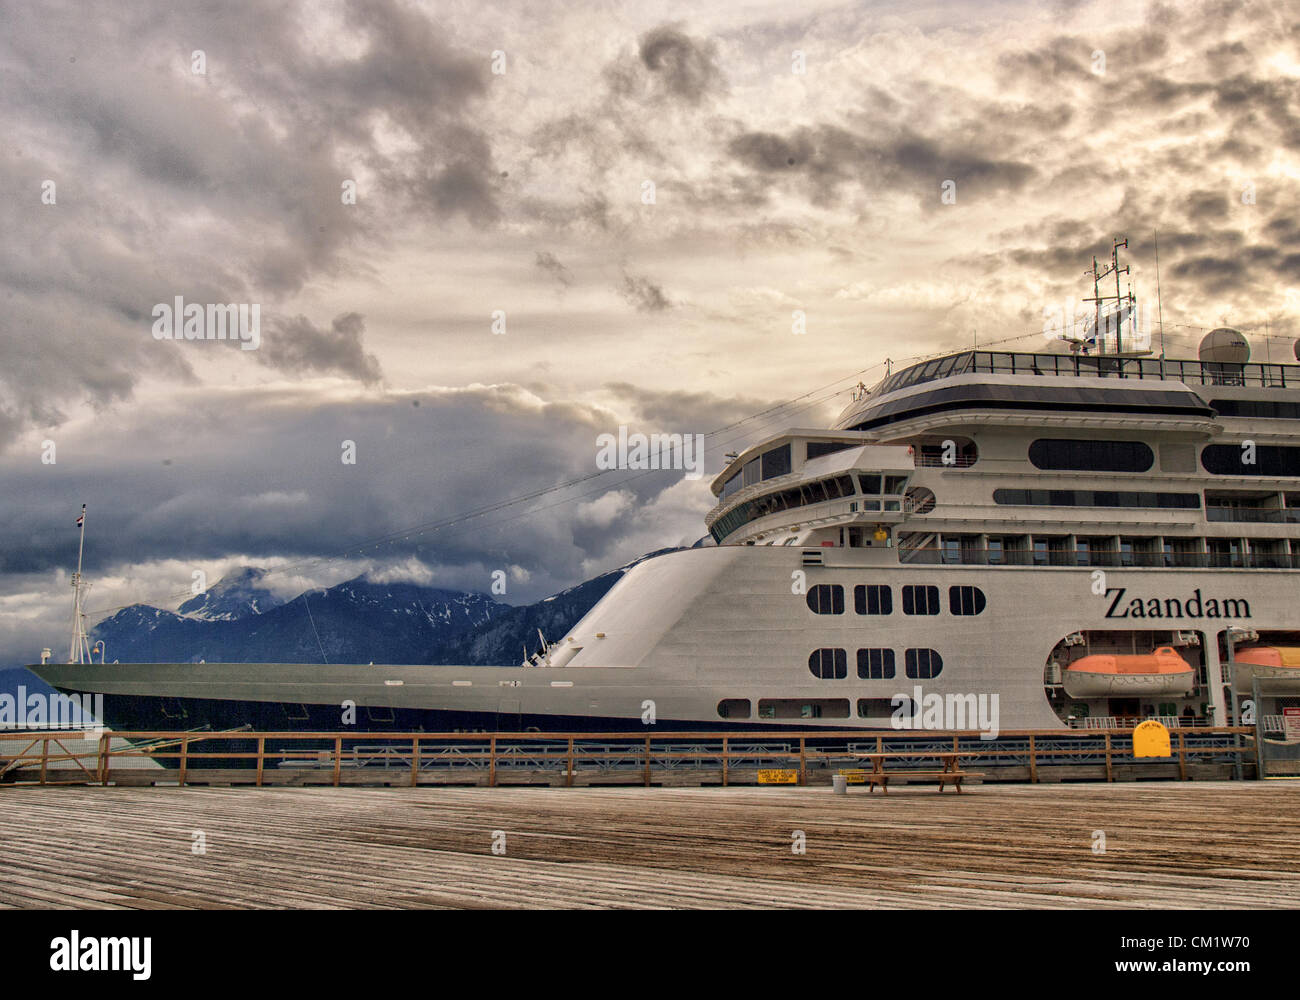 July 4, 2012 - Haines, Alaska, US - The ms Zaandam, a Holland America Line cruise ship, docked in Portage Cove at Haines, Alaska in early morning light. Dramatic clouds and the Chilkoot Mountain Range, part of the Coastal Range of mountains, form a spectacular backdrop. (Credit Image: © Arnold Drapkin/ZUMAPRESS.com) Stock Photo